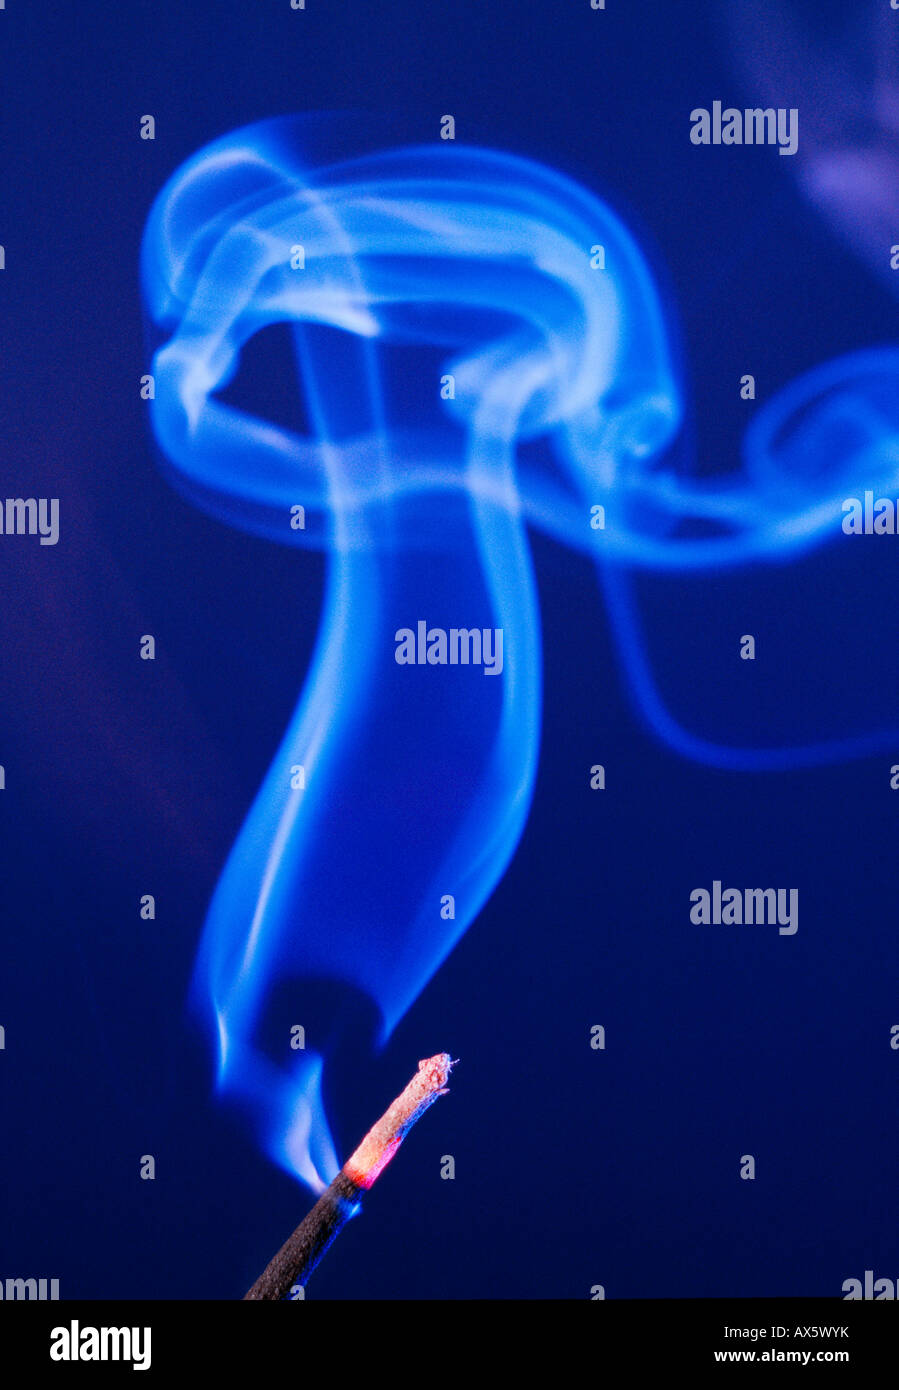 Smoke rising from an incense stick Stock Photo